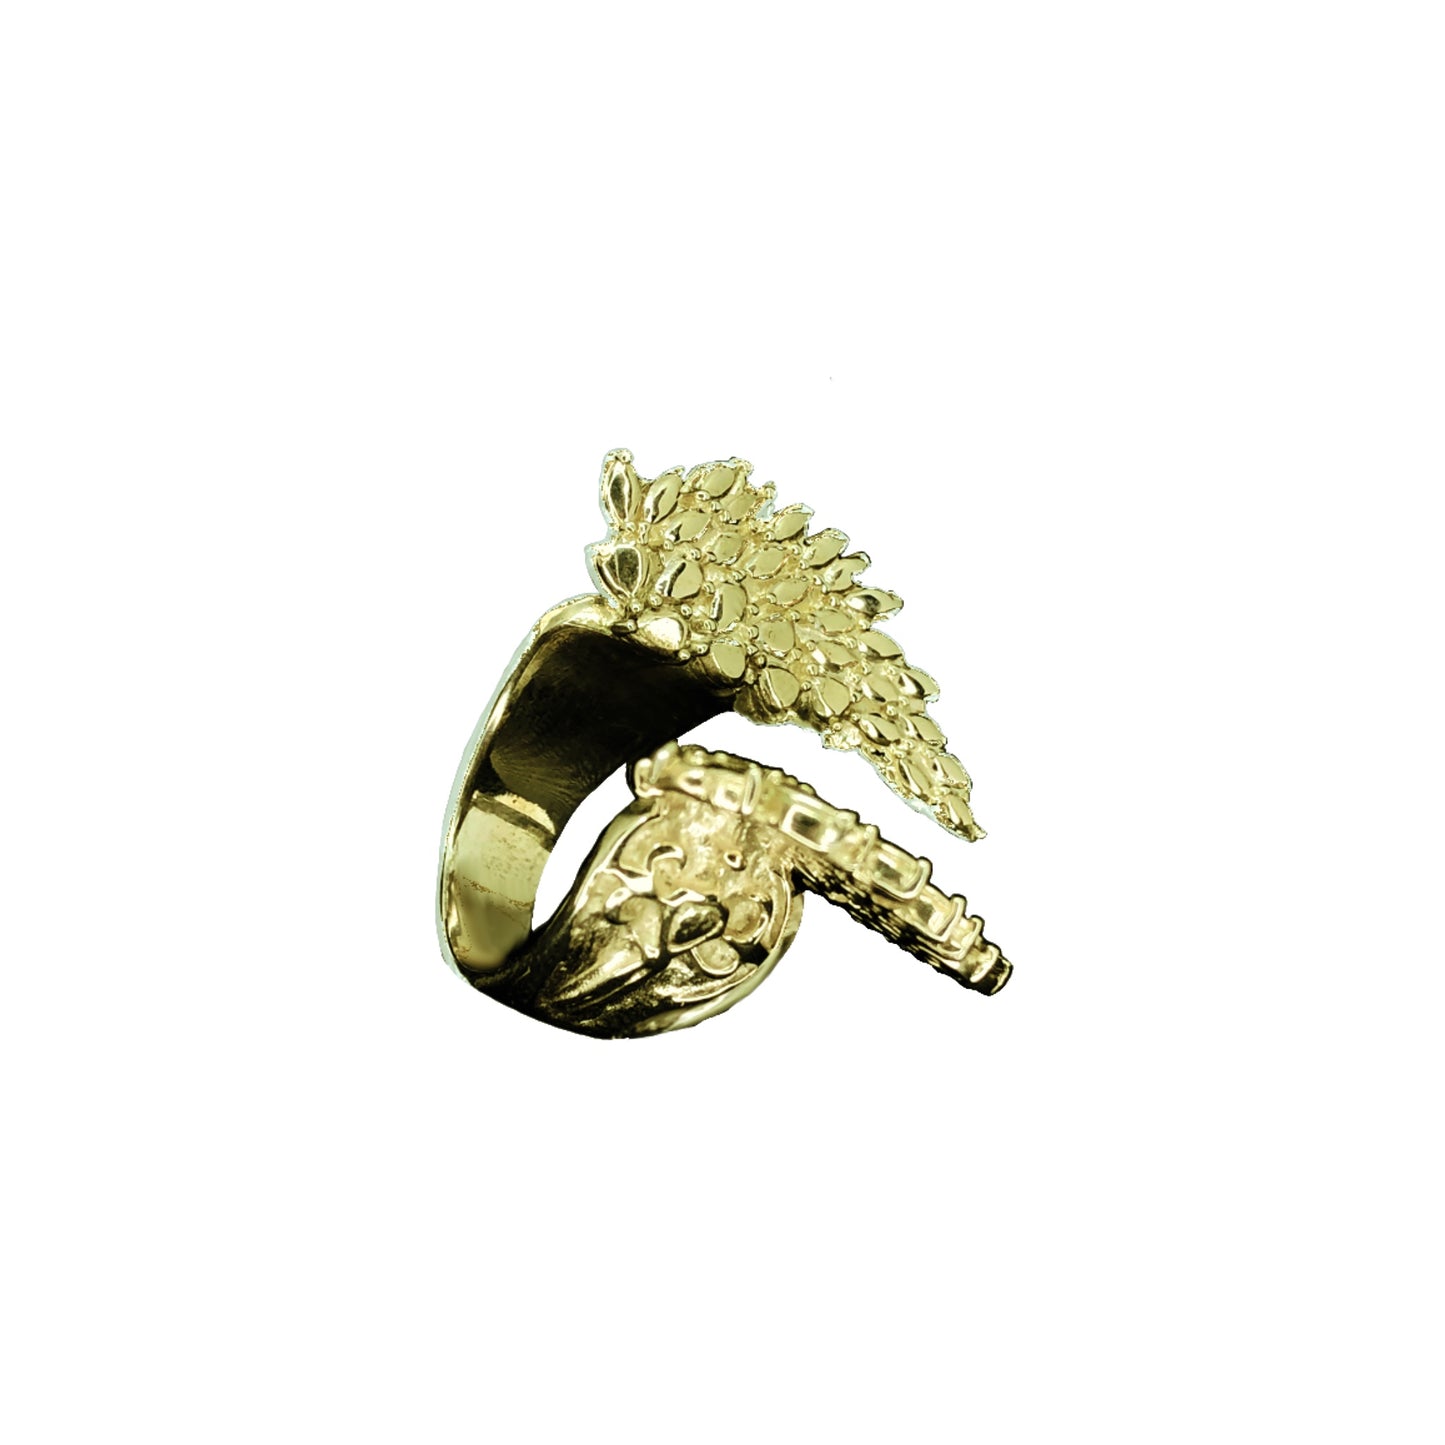 Ring of Daedalus in Sterling Silver, 18k Gold Over Silver, or 18k White Gold